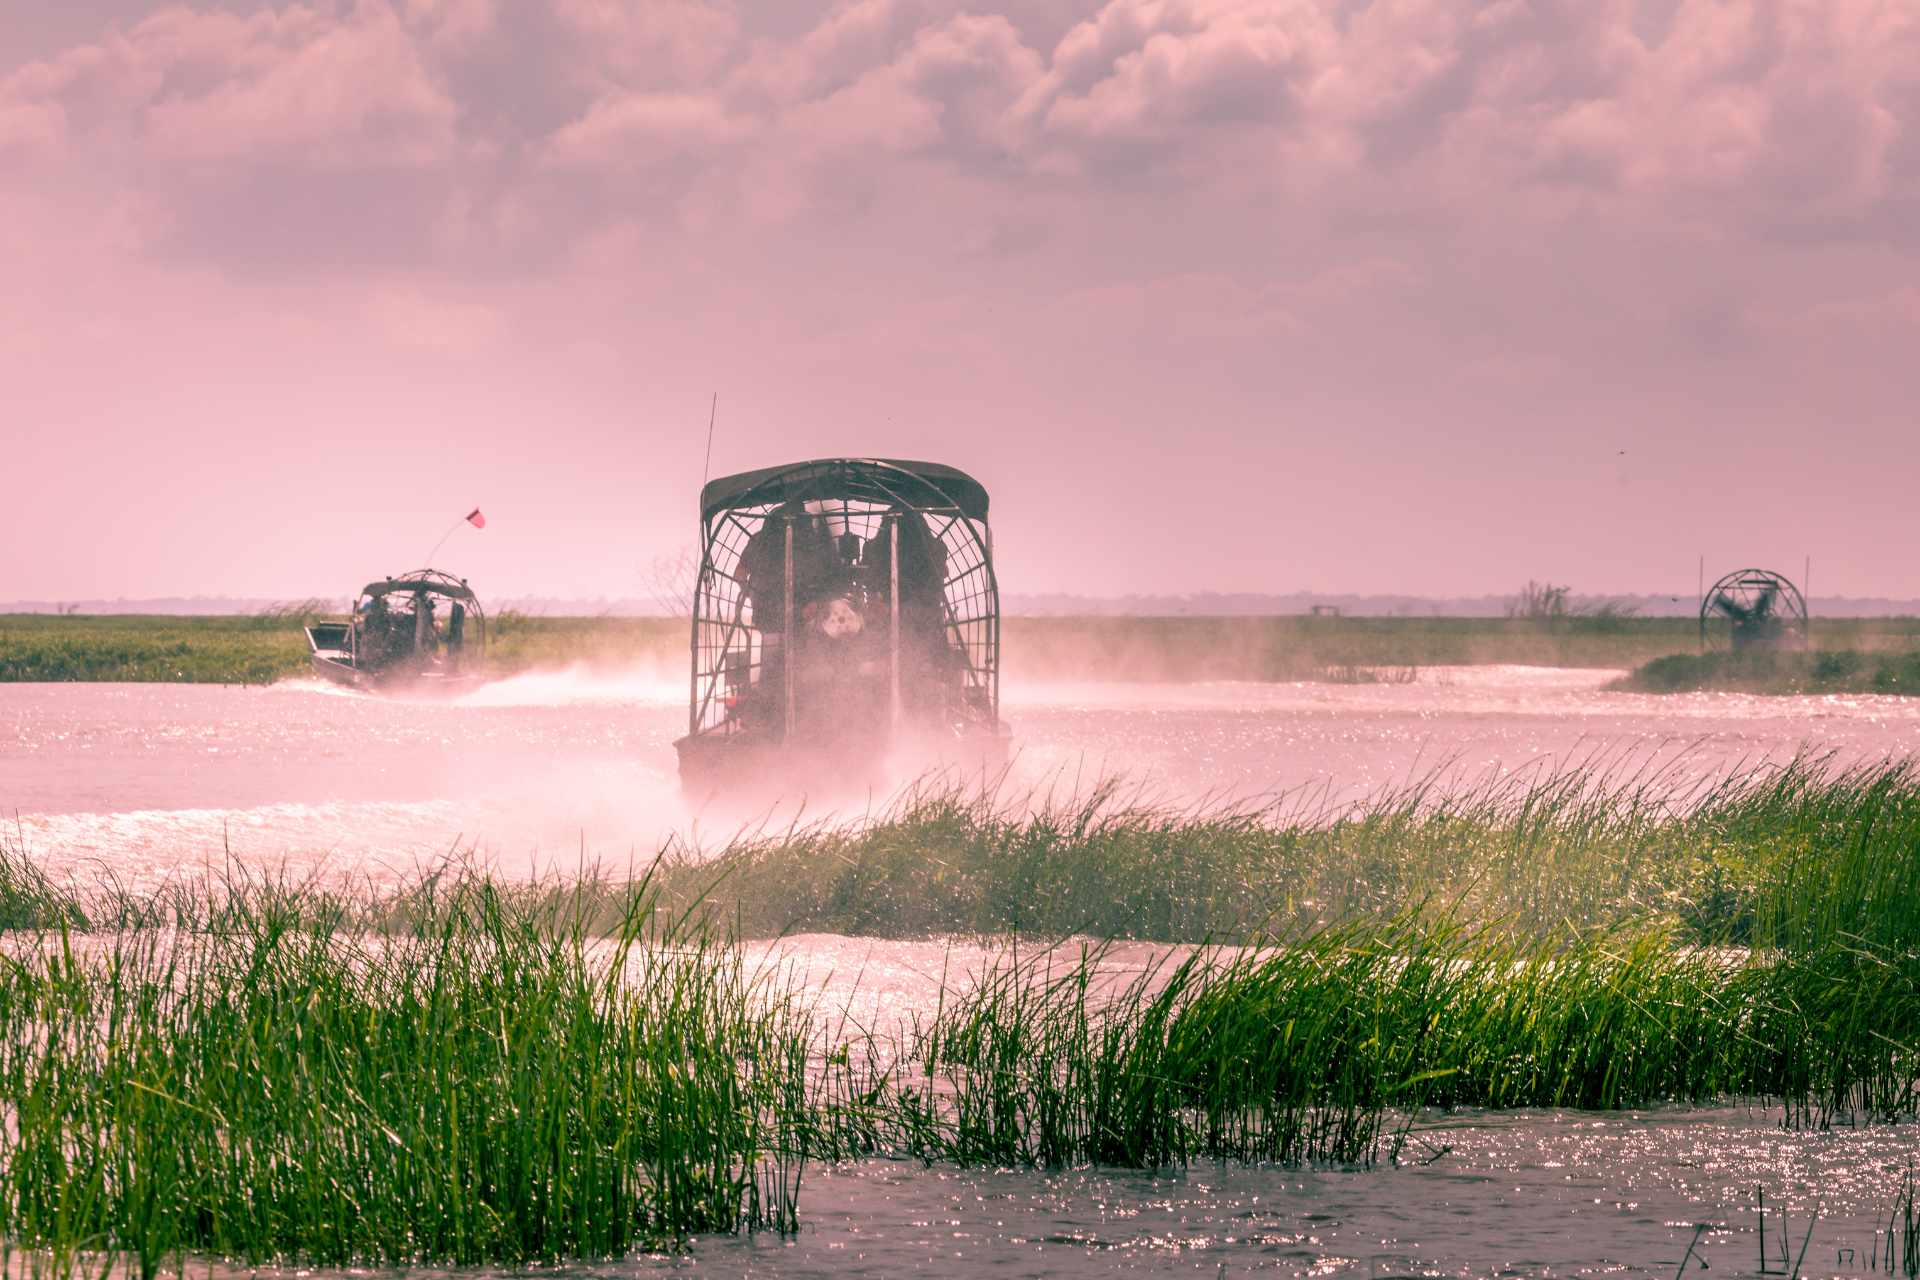 Everglades airboat ride in South Florida, National Park. ©Getty Images